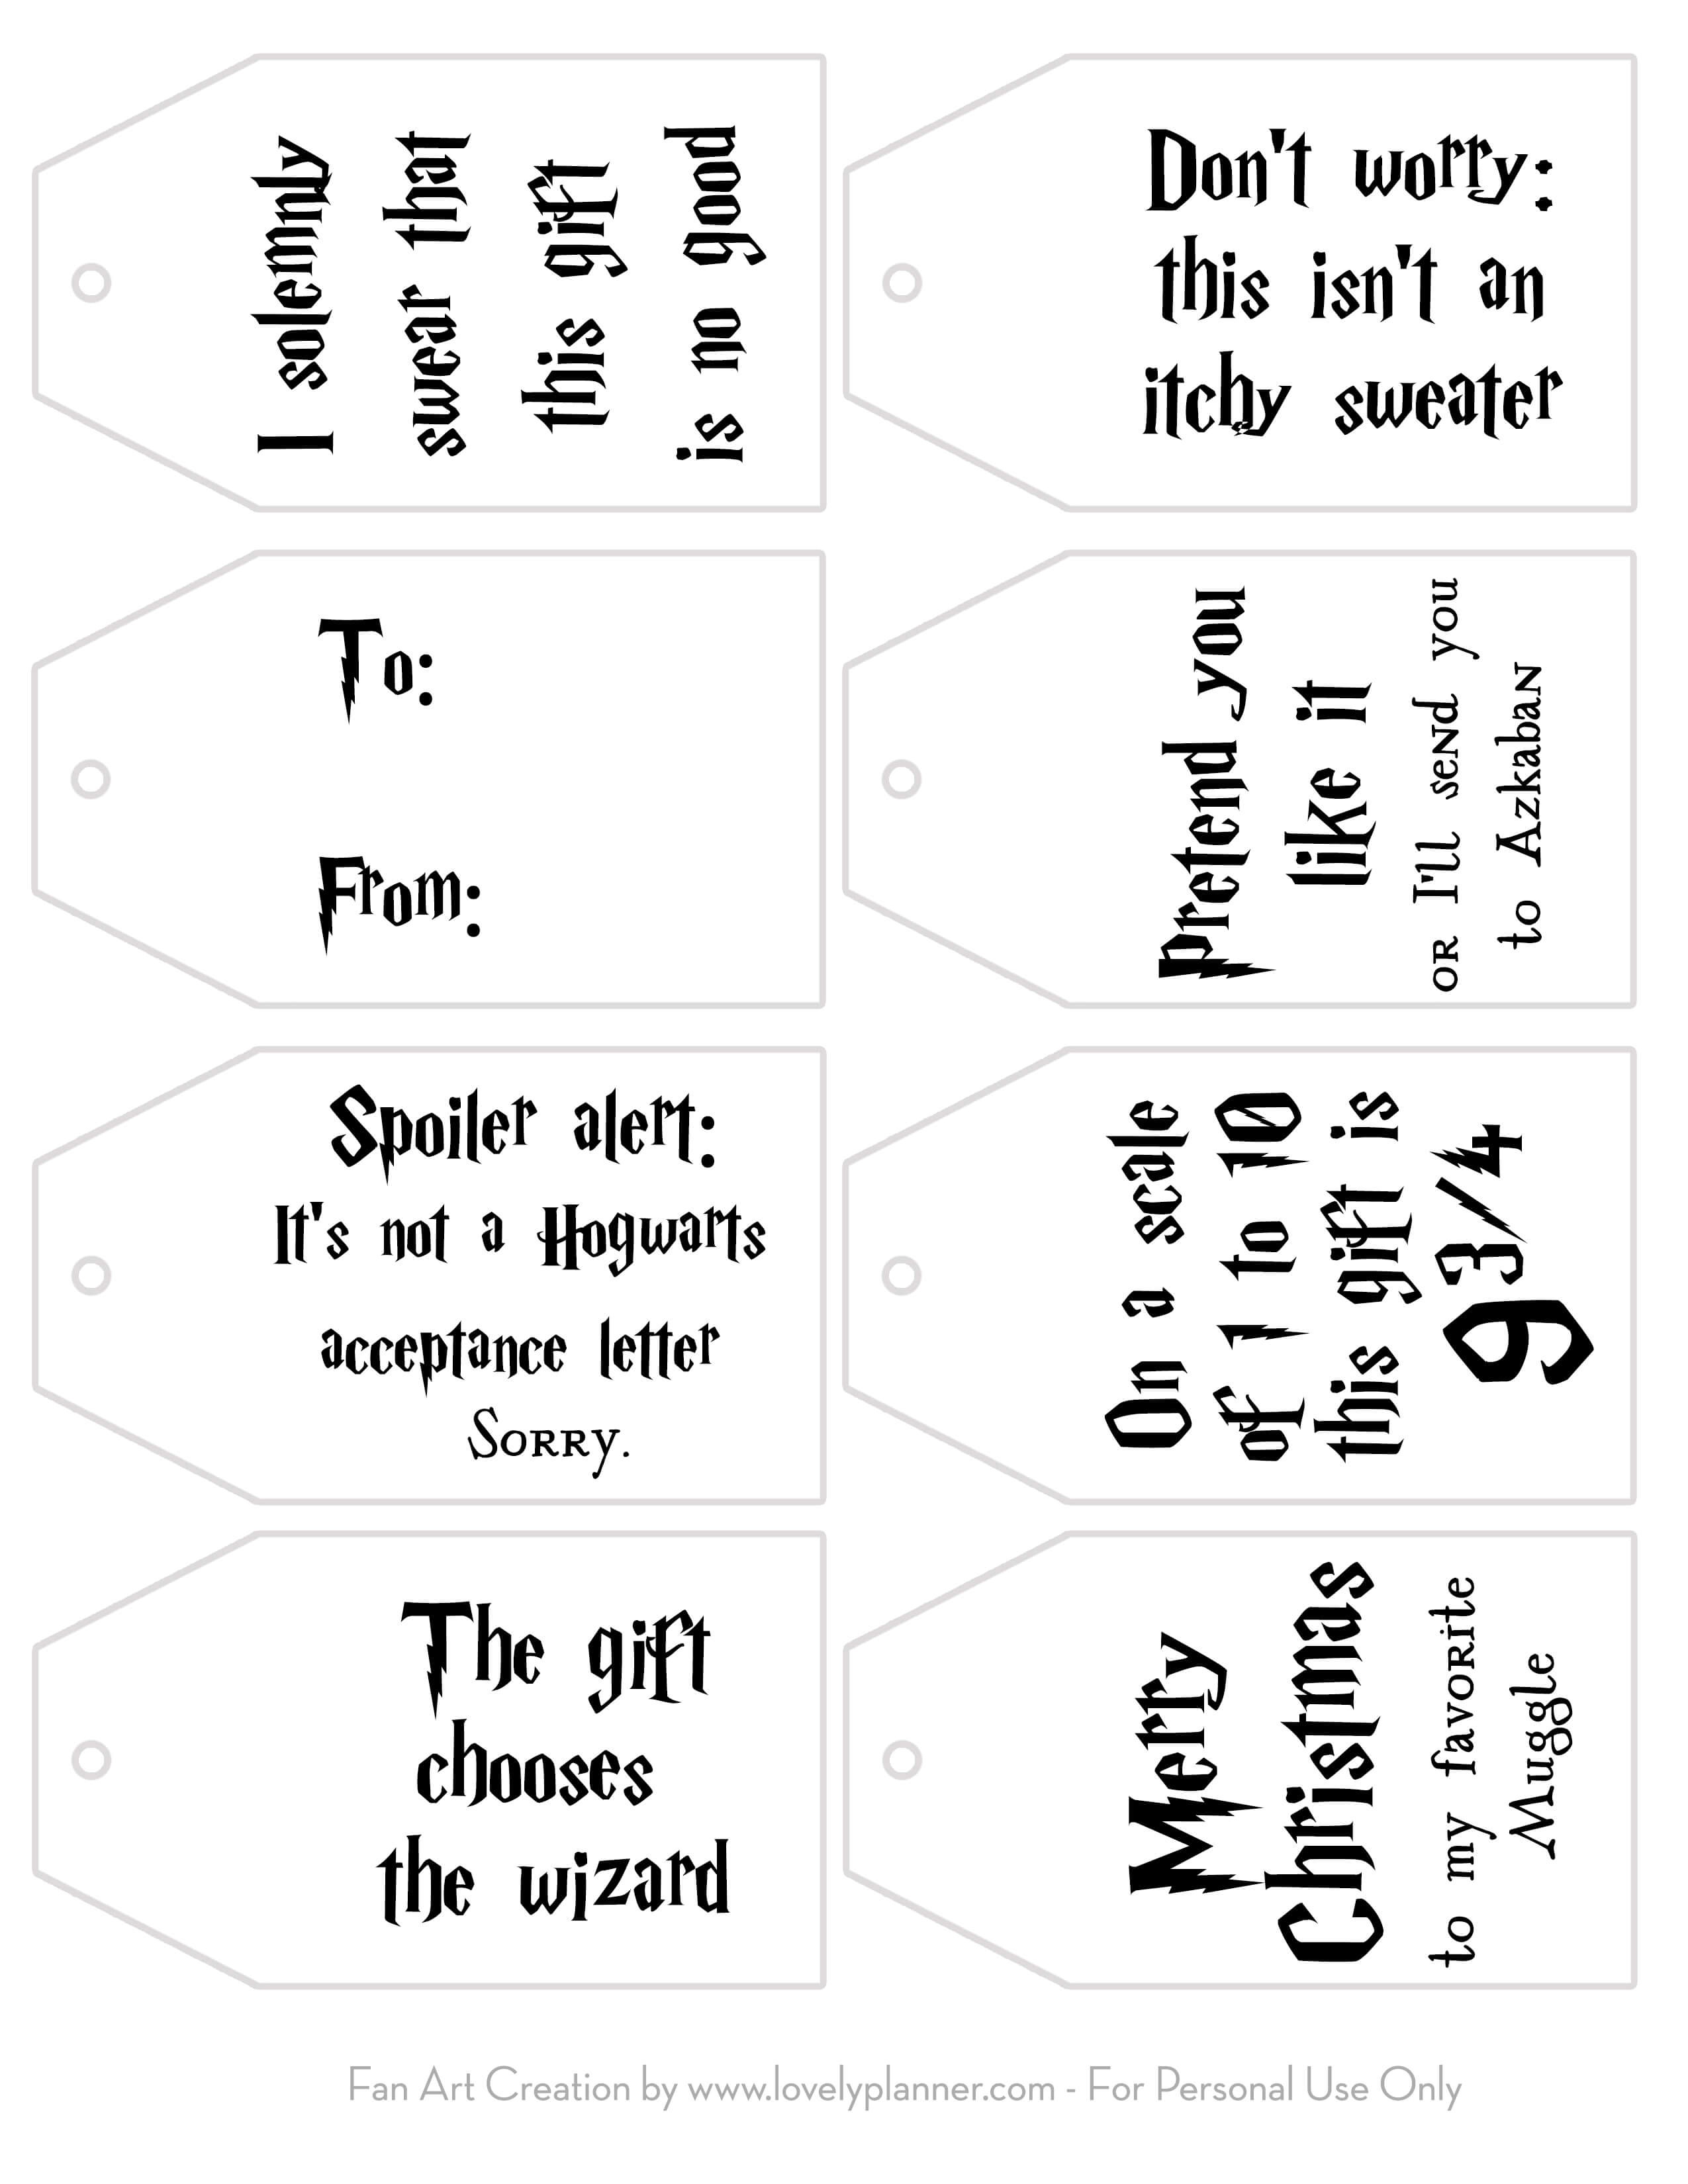 Free Printable Harry Potter Gift Tags For Christmas - Lovely Planner - Christmas Gift Tags Free Printable Black And White